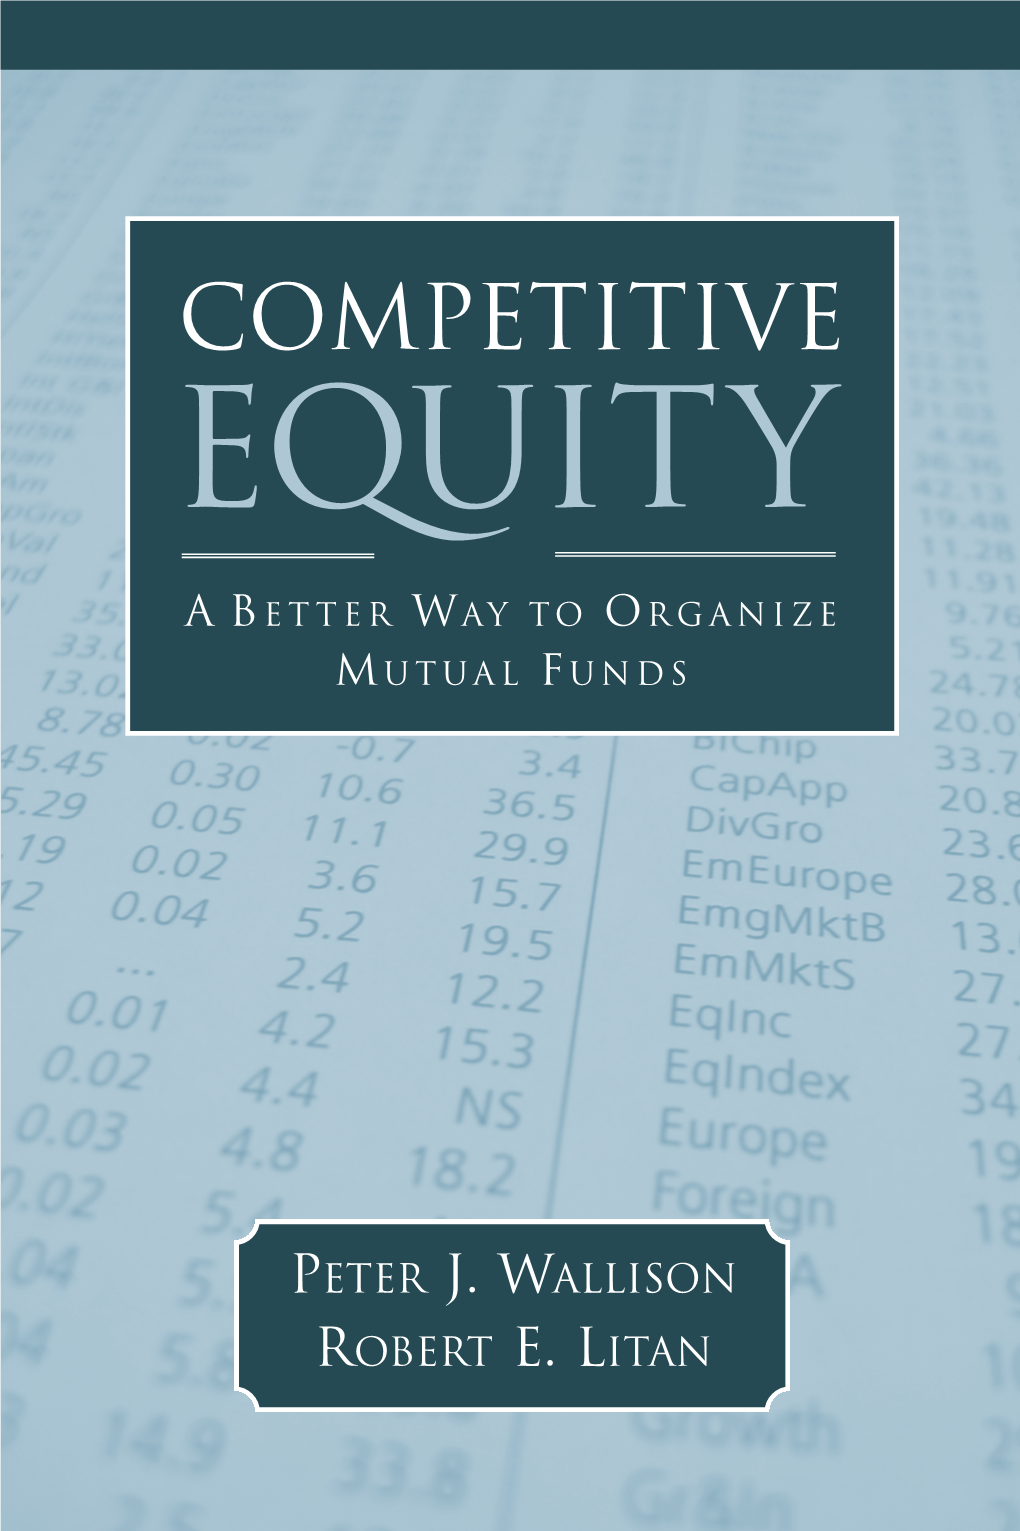 Competitive Equity